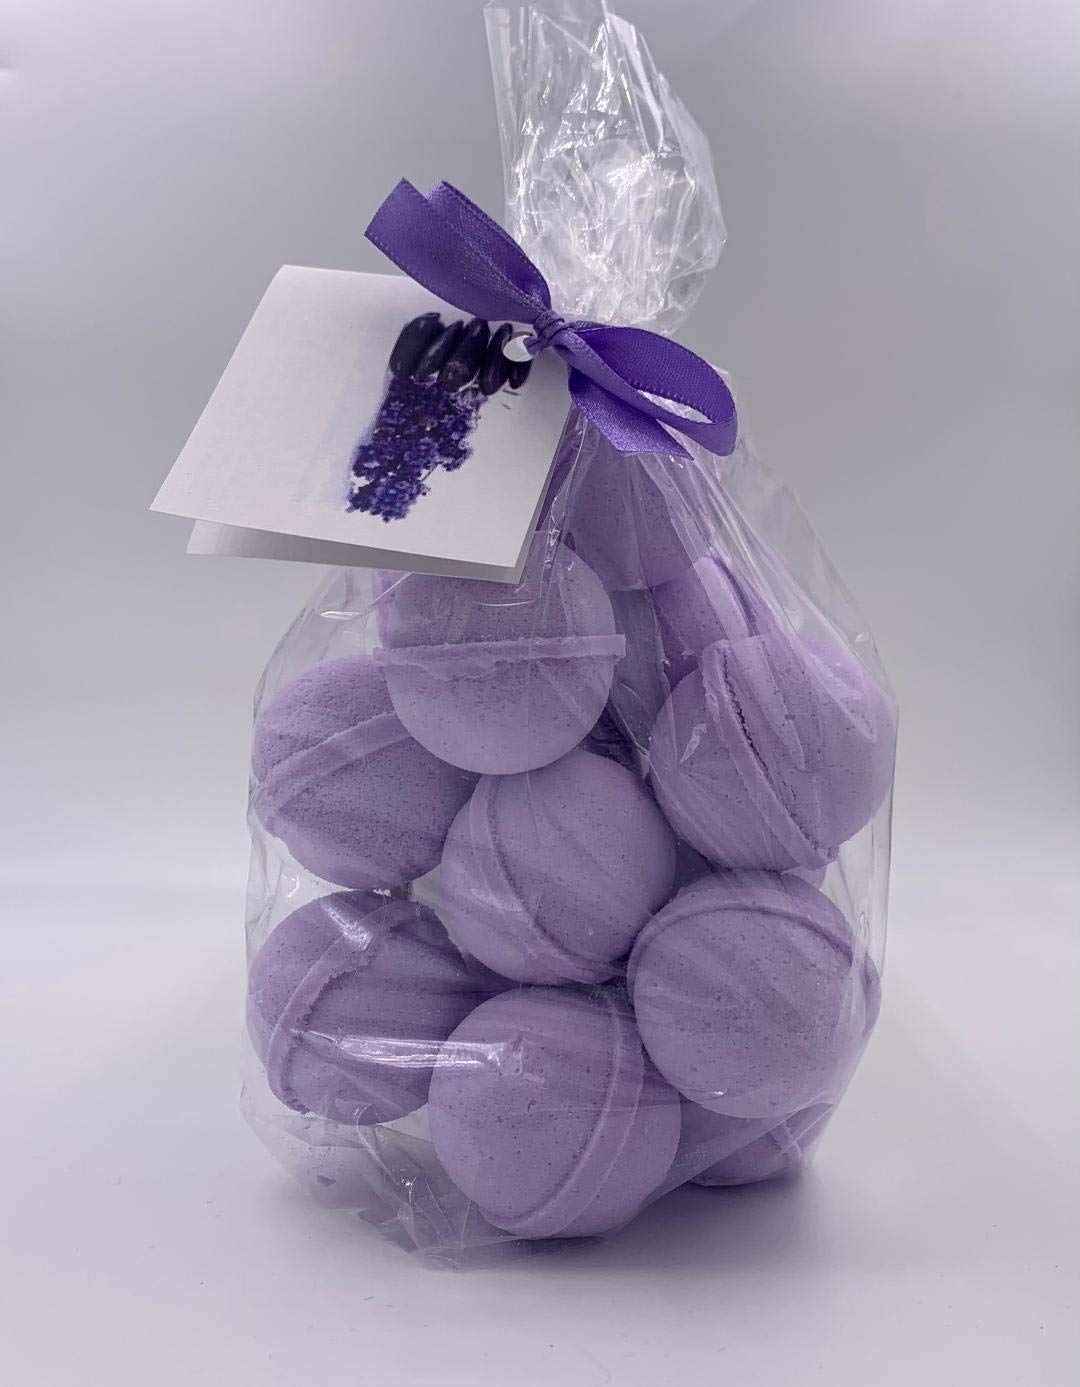 SpaPure TASSIE LAVENDER Bath Bombs - 14 Bath Fizzies made with Shea, Mango and Cocoa Butter, Ultra Moisturizing (12 Oz) Great for Dry Skin, All Skin Types (Tassie Lavender FBA)